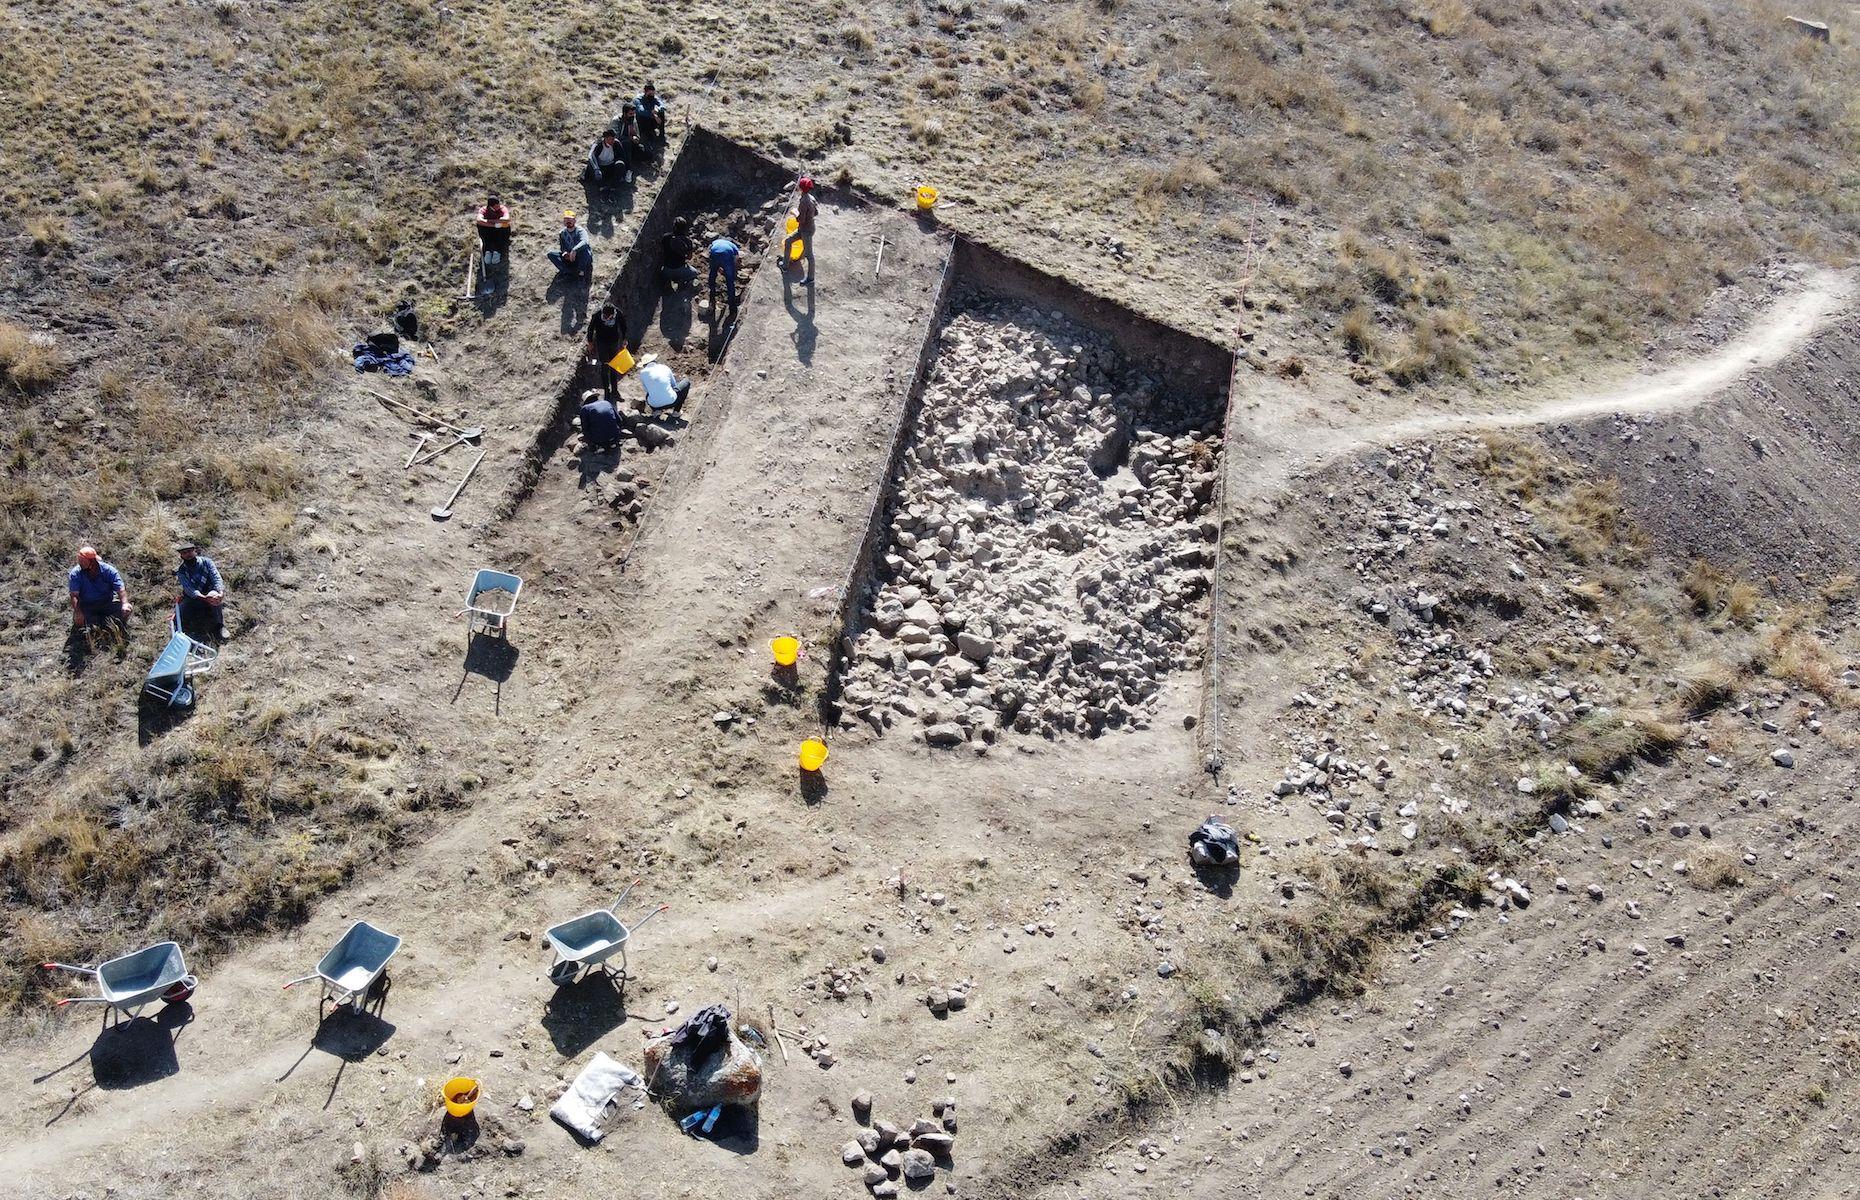 <p>Turkish archaeologists uncovered floors that have been described as <a href="https://www.arabnews.com/node/1936096/middle-east">the “ancestor” of Mediterranean mosaics</a> in Usakli Hoyuk, an archaeological site in Yozgat’s Sorgun district. In September 2021, the 3,500-year-old paving stones were found in the remnants of a 15th-century BC temple dedicated to Teshub, a storm deity worshipped by the Hittites. It marks a huge step towards understanding more about the daily life of the little-understood Bronze Age Anatolian civilisation.</p>